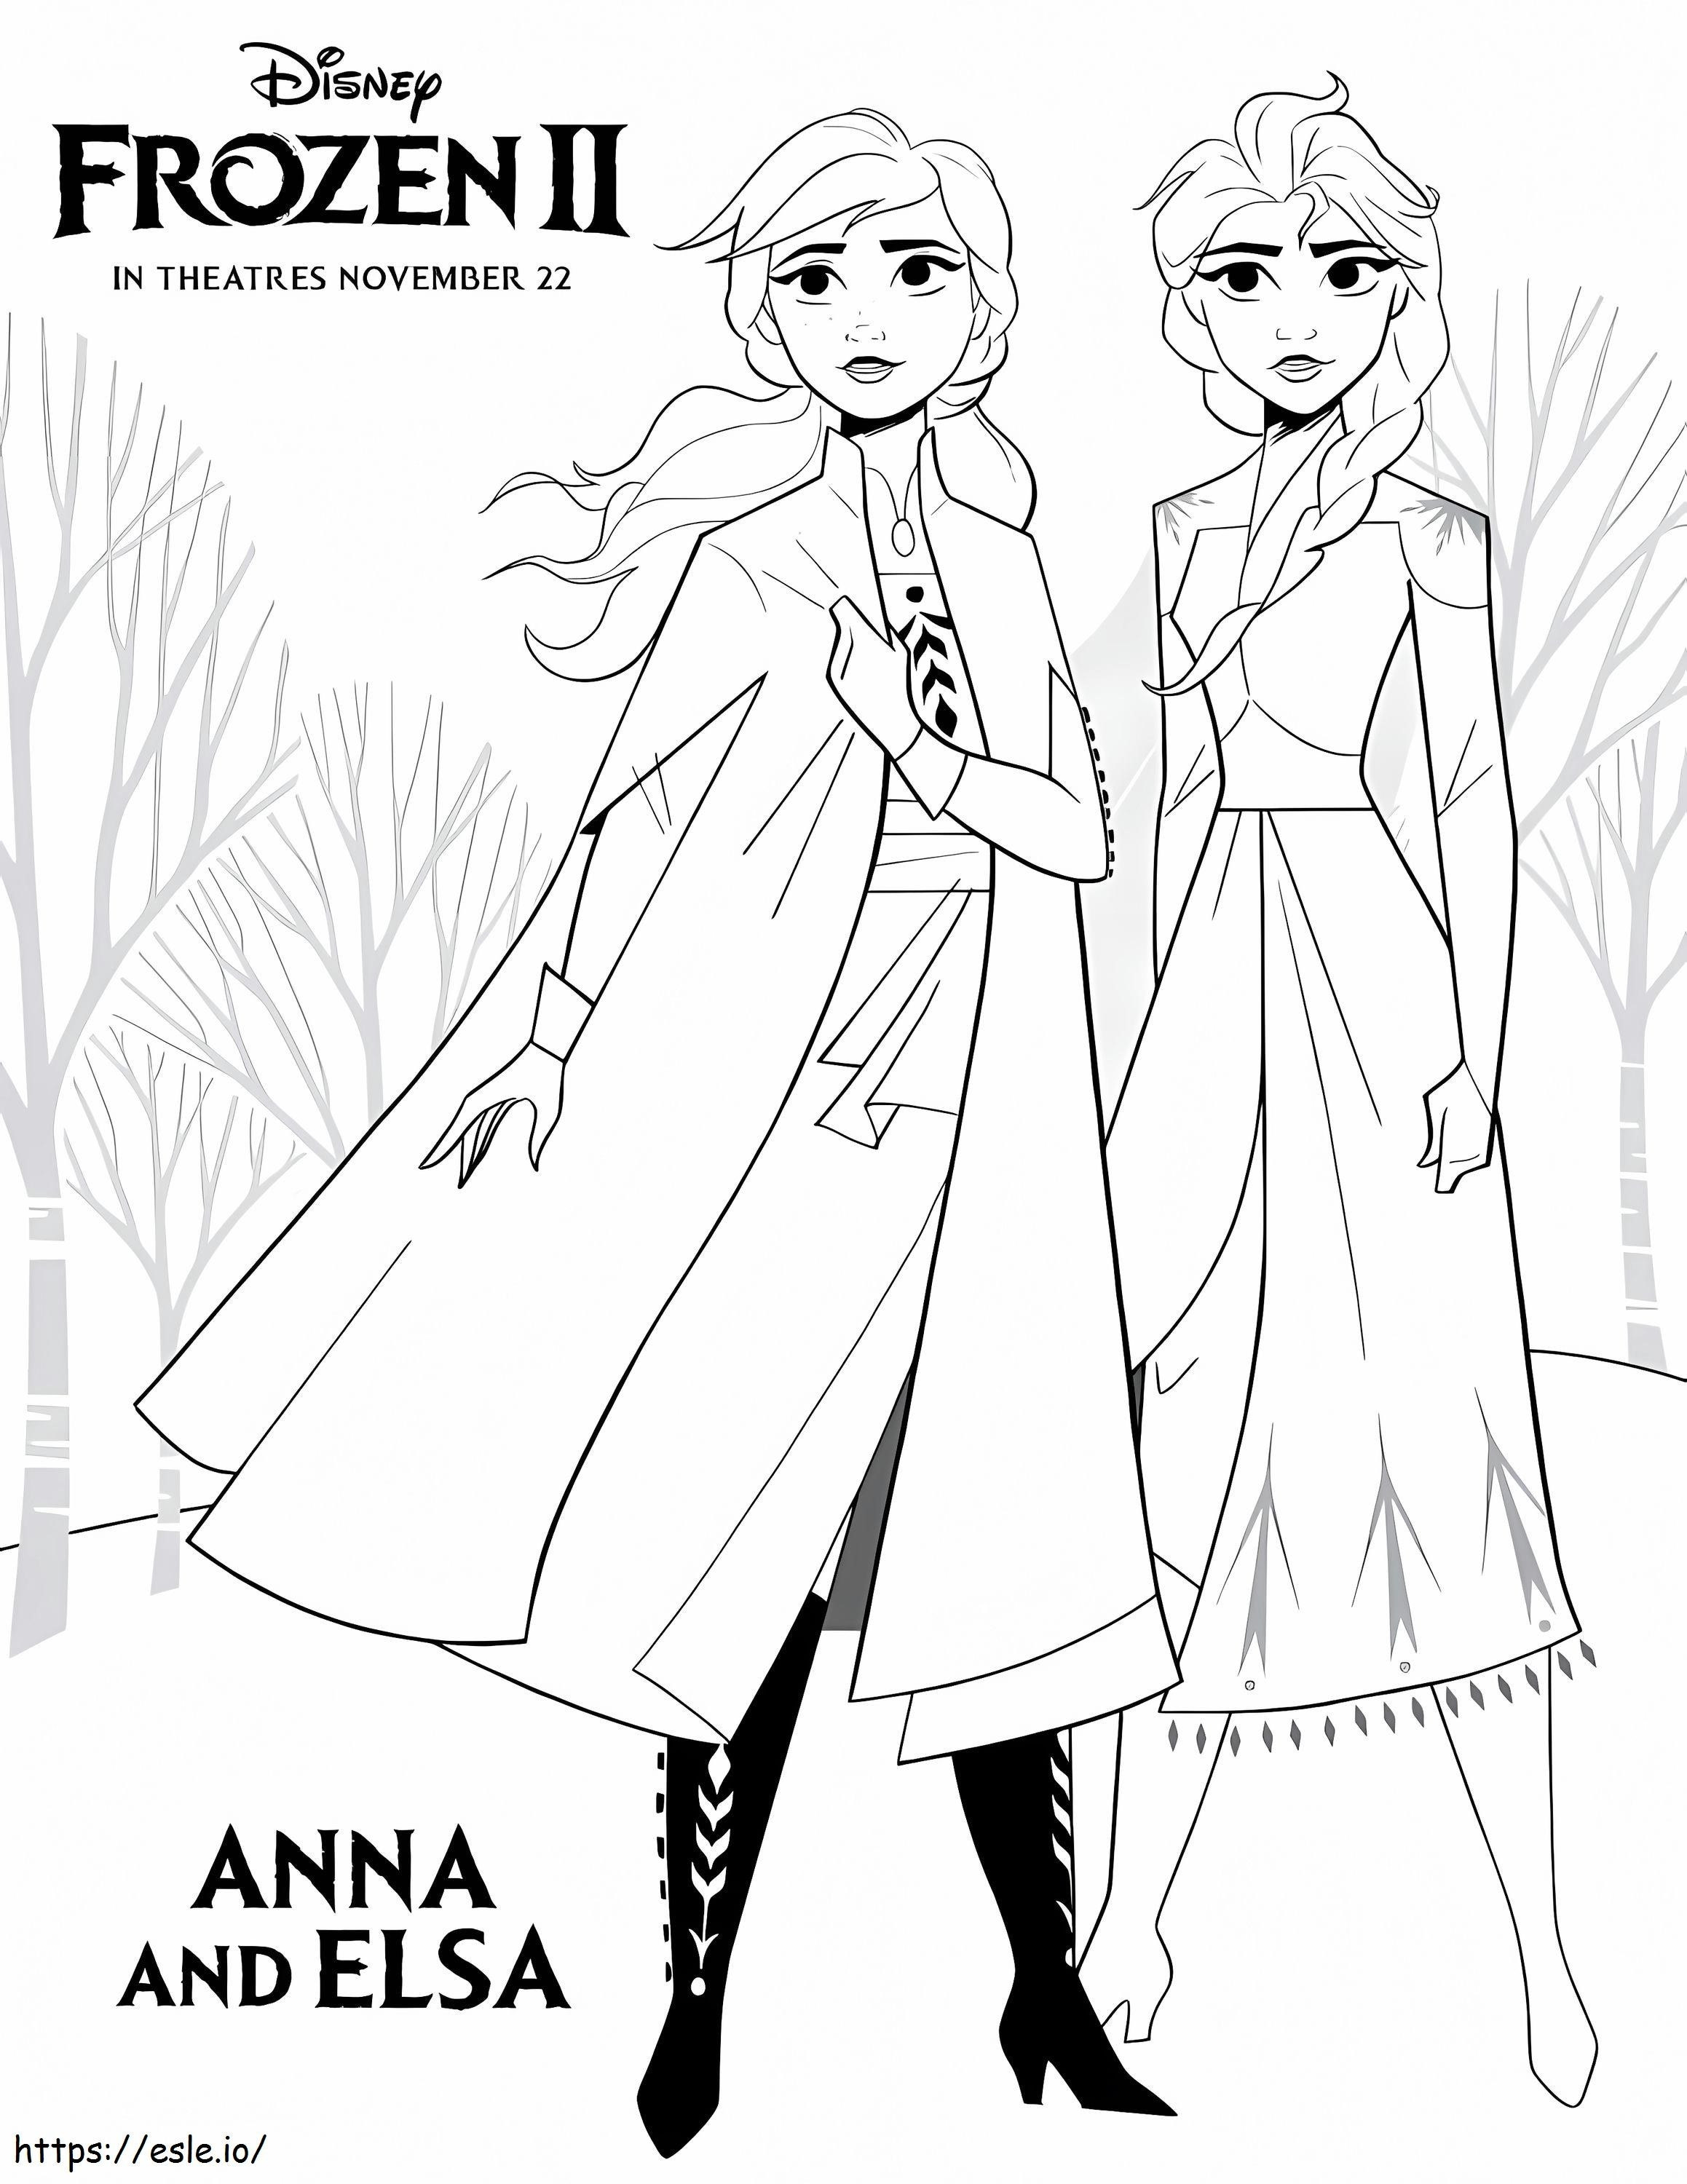 Anna And Elsa Frozen 2 Coloring Page coloring page